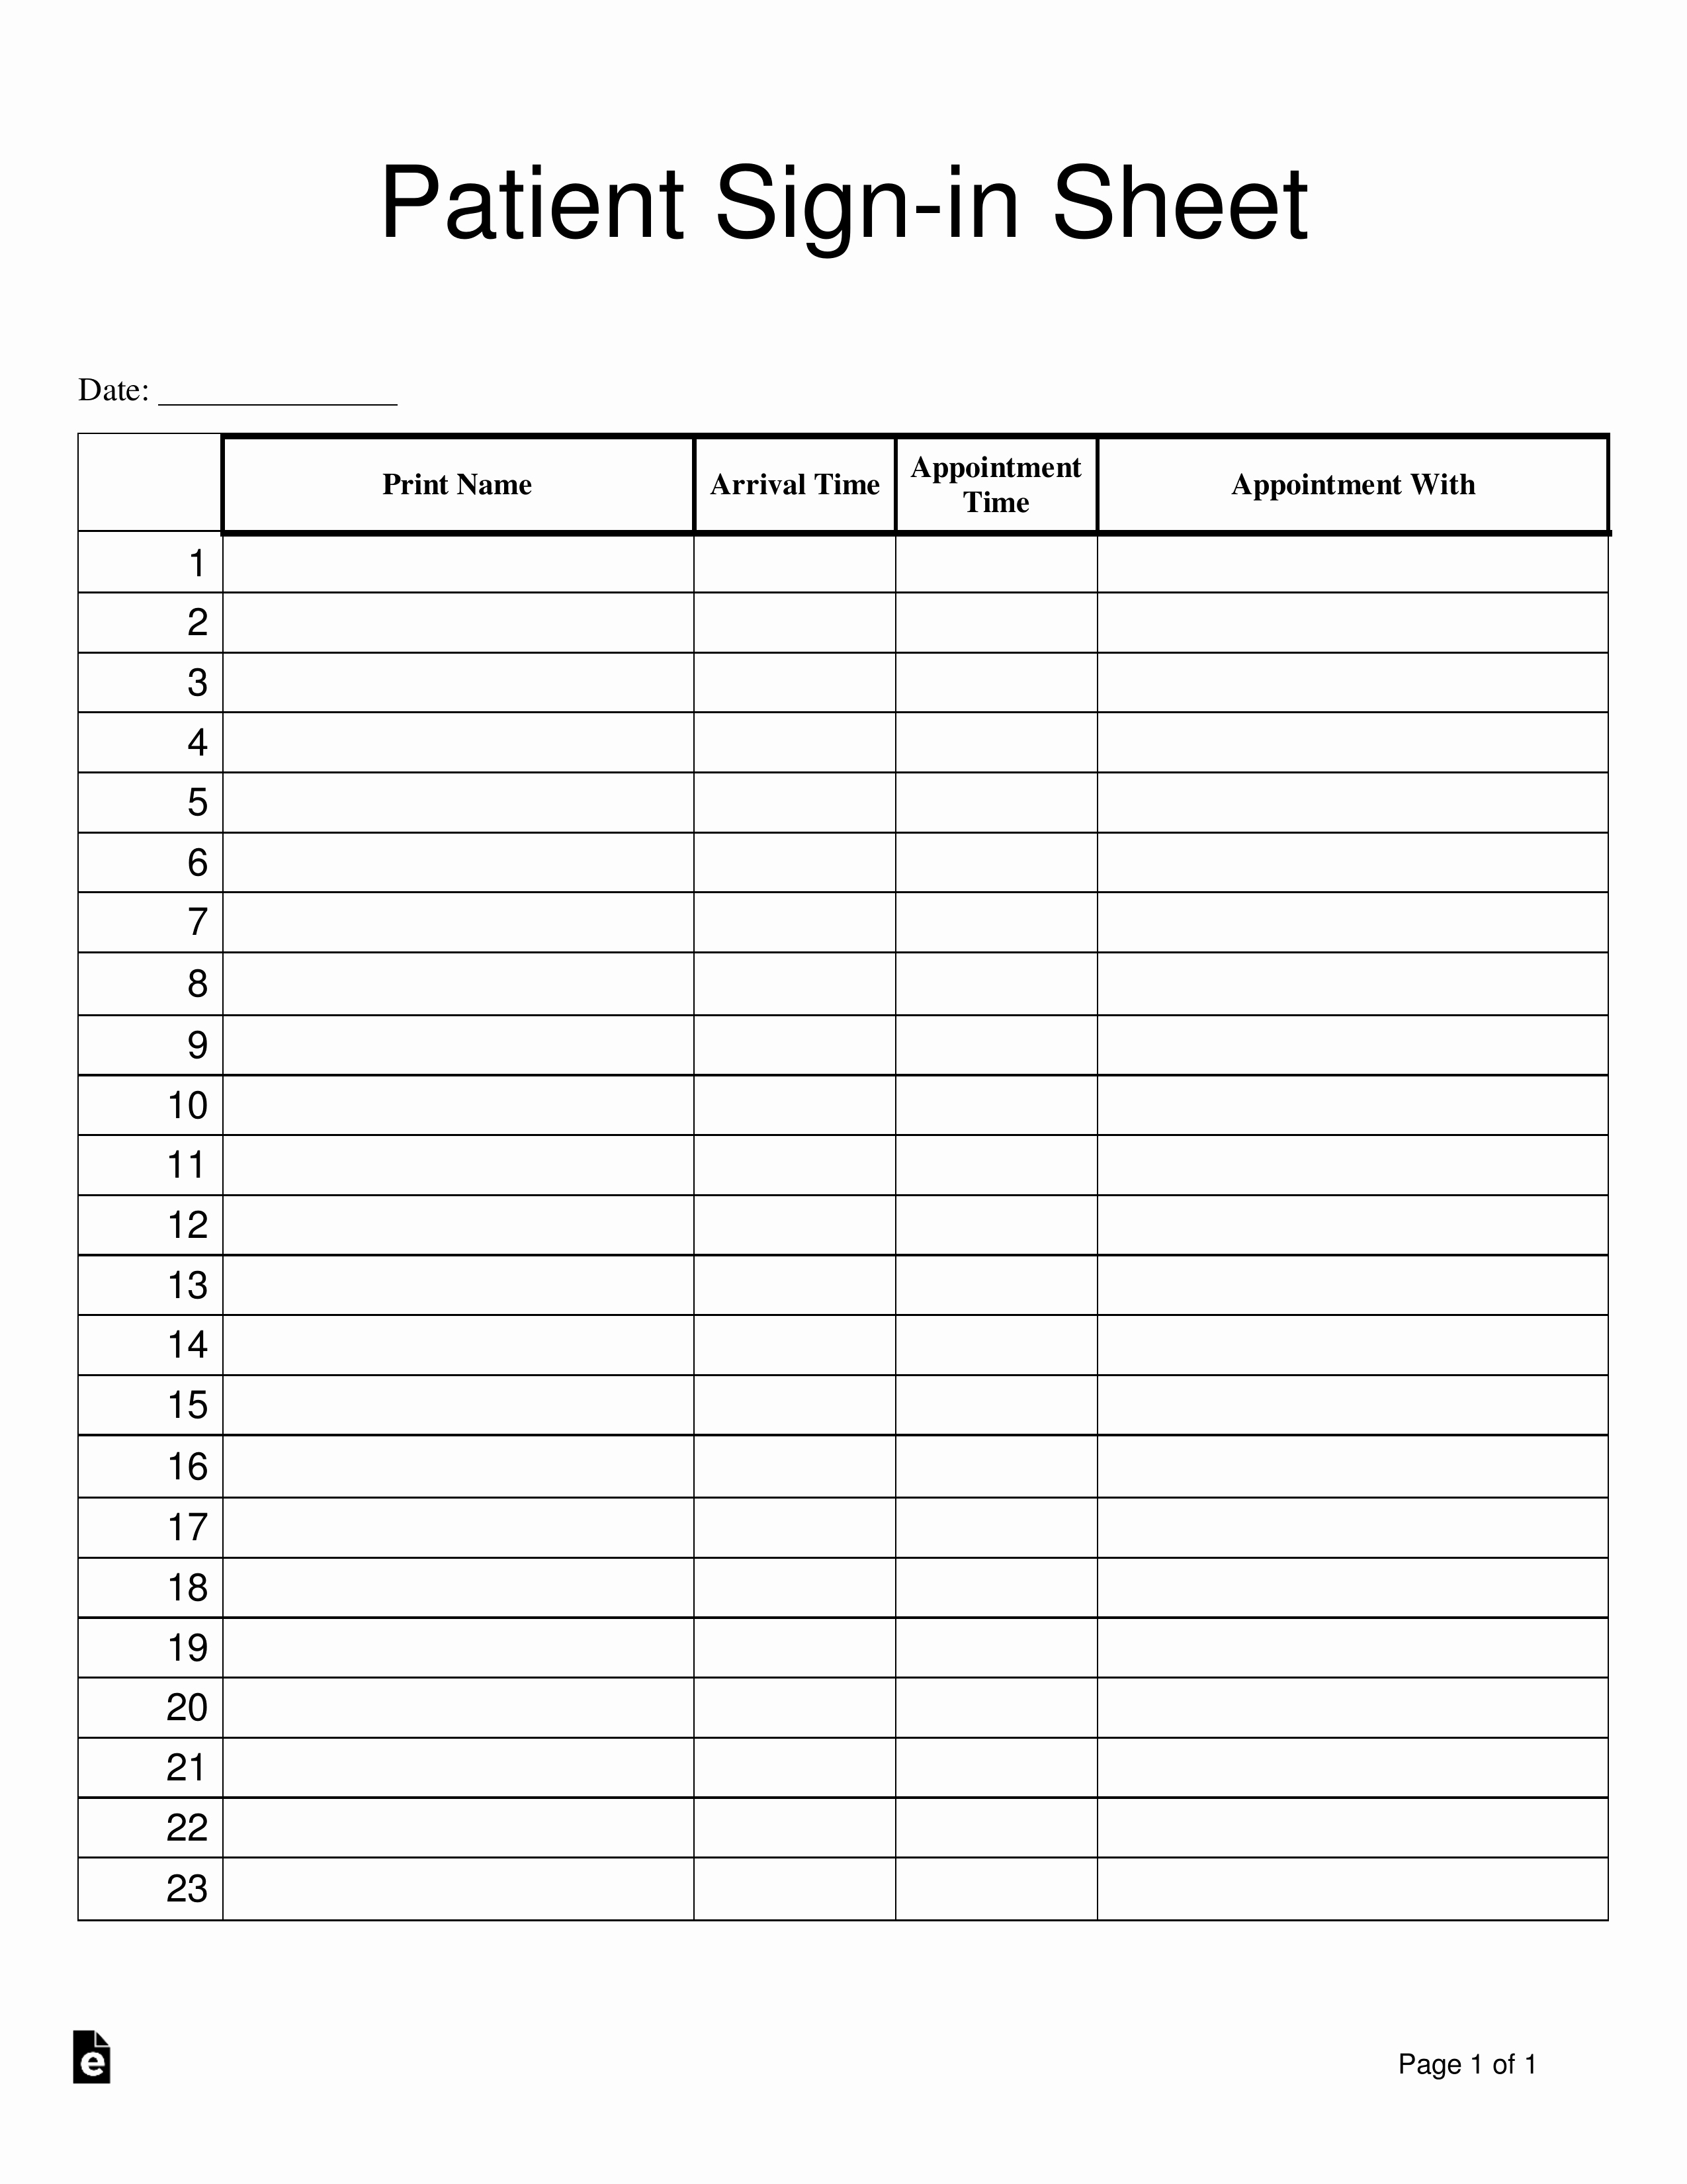 Patient Sign In Sheet Template Beautiful Patient Sign In Sheet Template